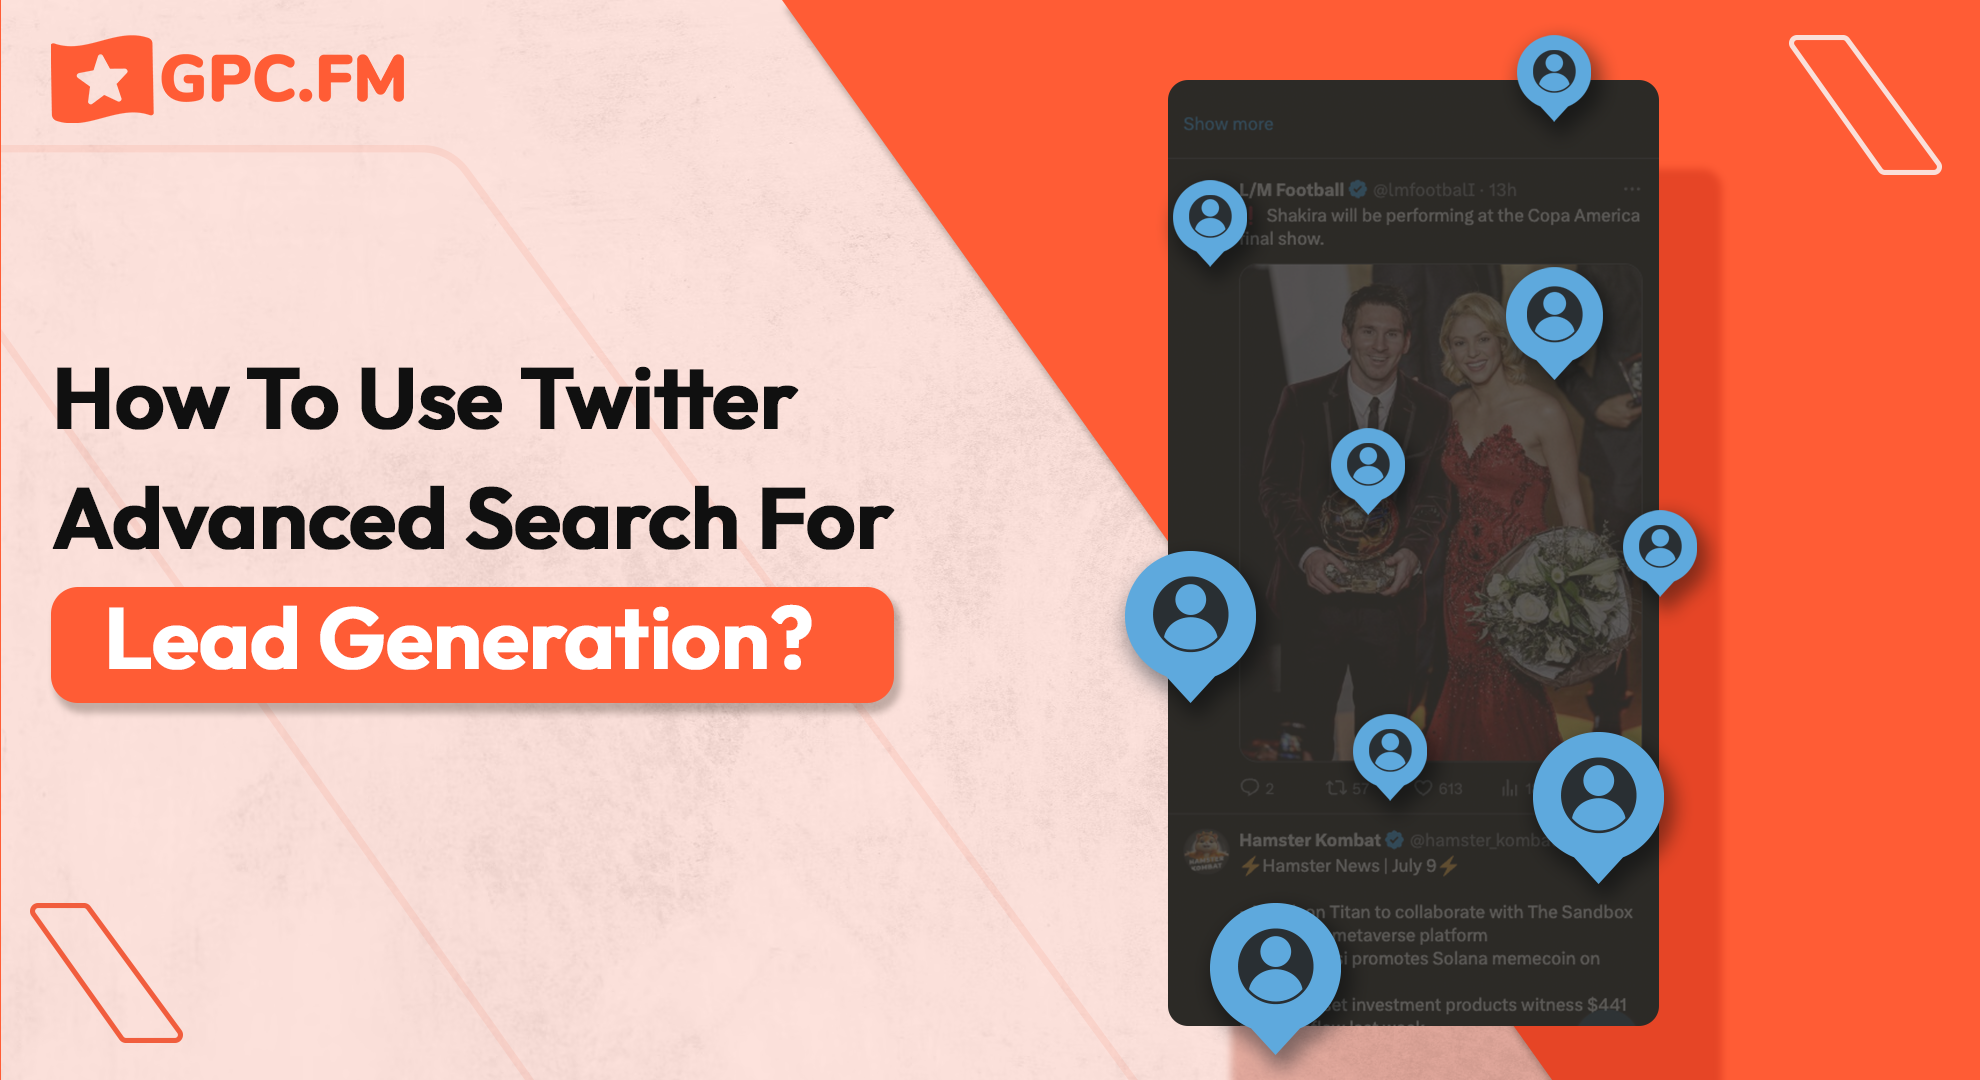 How To Use Twitter Advanced Search For Lead Generation?